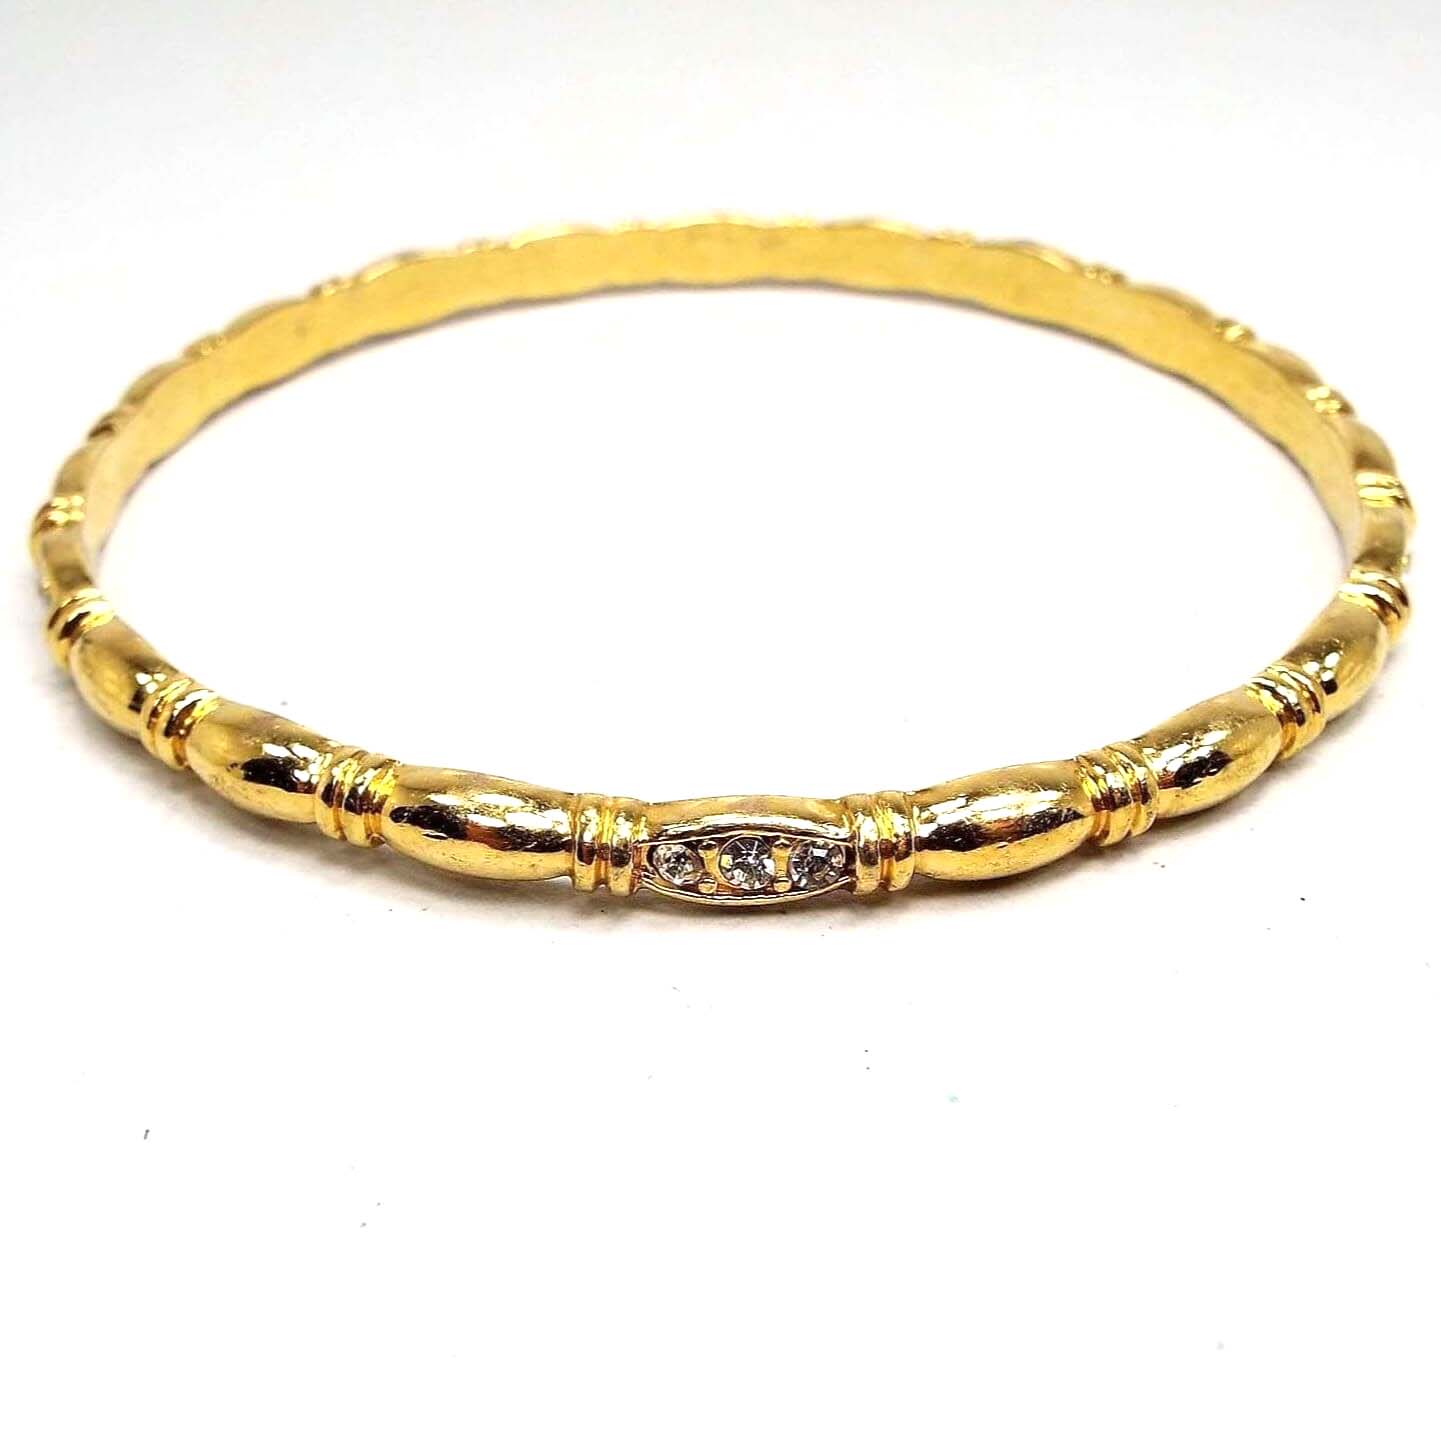 Angled front and side view of the retro vintage rhinestone bangle bracelet. It is gold tone in color with a rounded oval and line design all the way around the edge. There is a small cluster of tiny clear round rhinestones on each side of the bracelet.